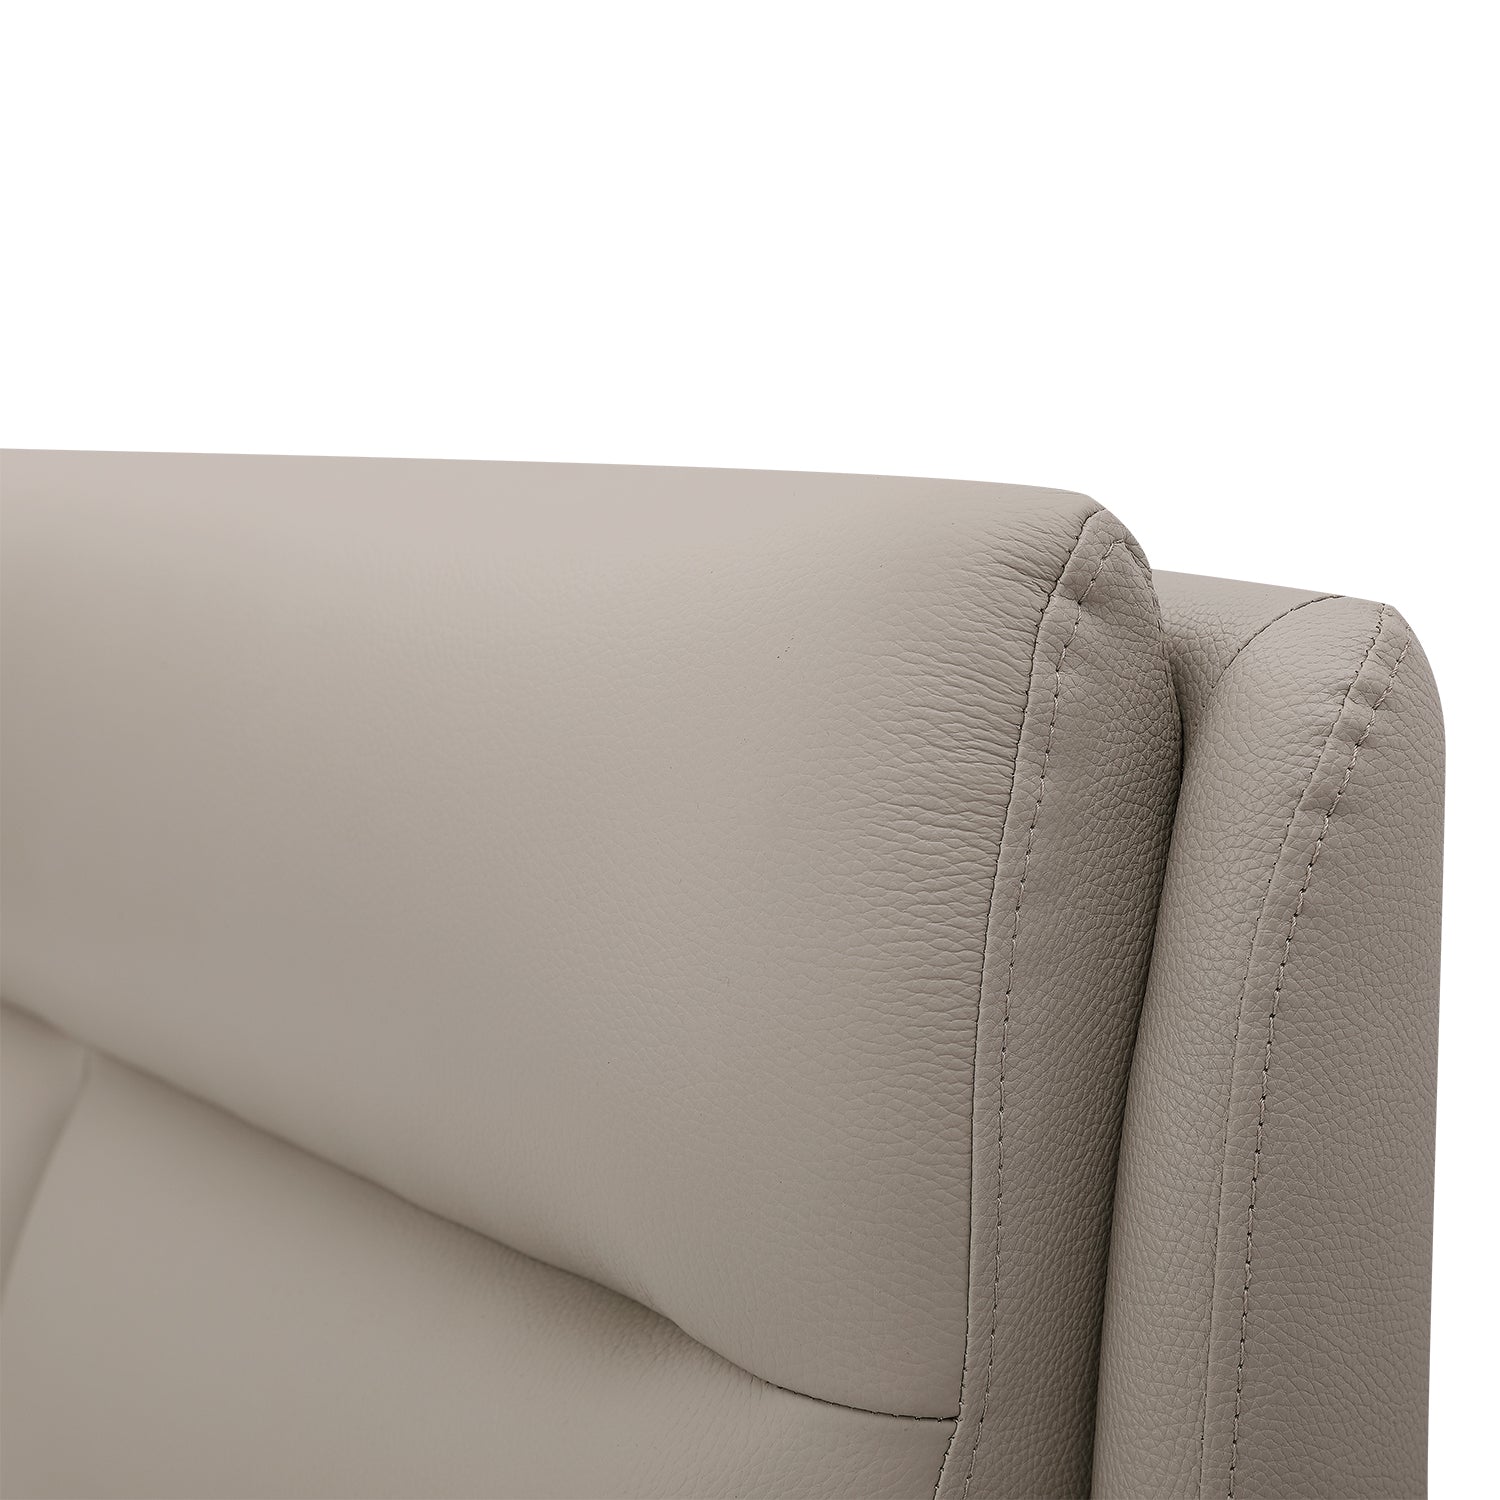 Close-up of beige leather headboard from Bed Frame BOC1 - 002 by DeRUCCI, highlighting quality craftsmanship and premium materials.